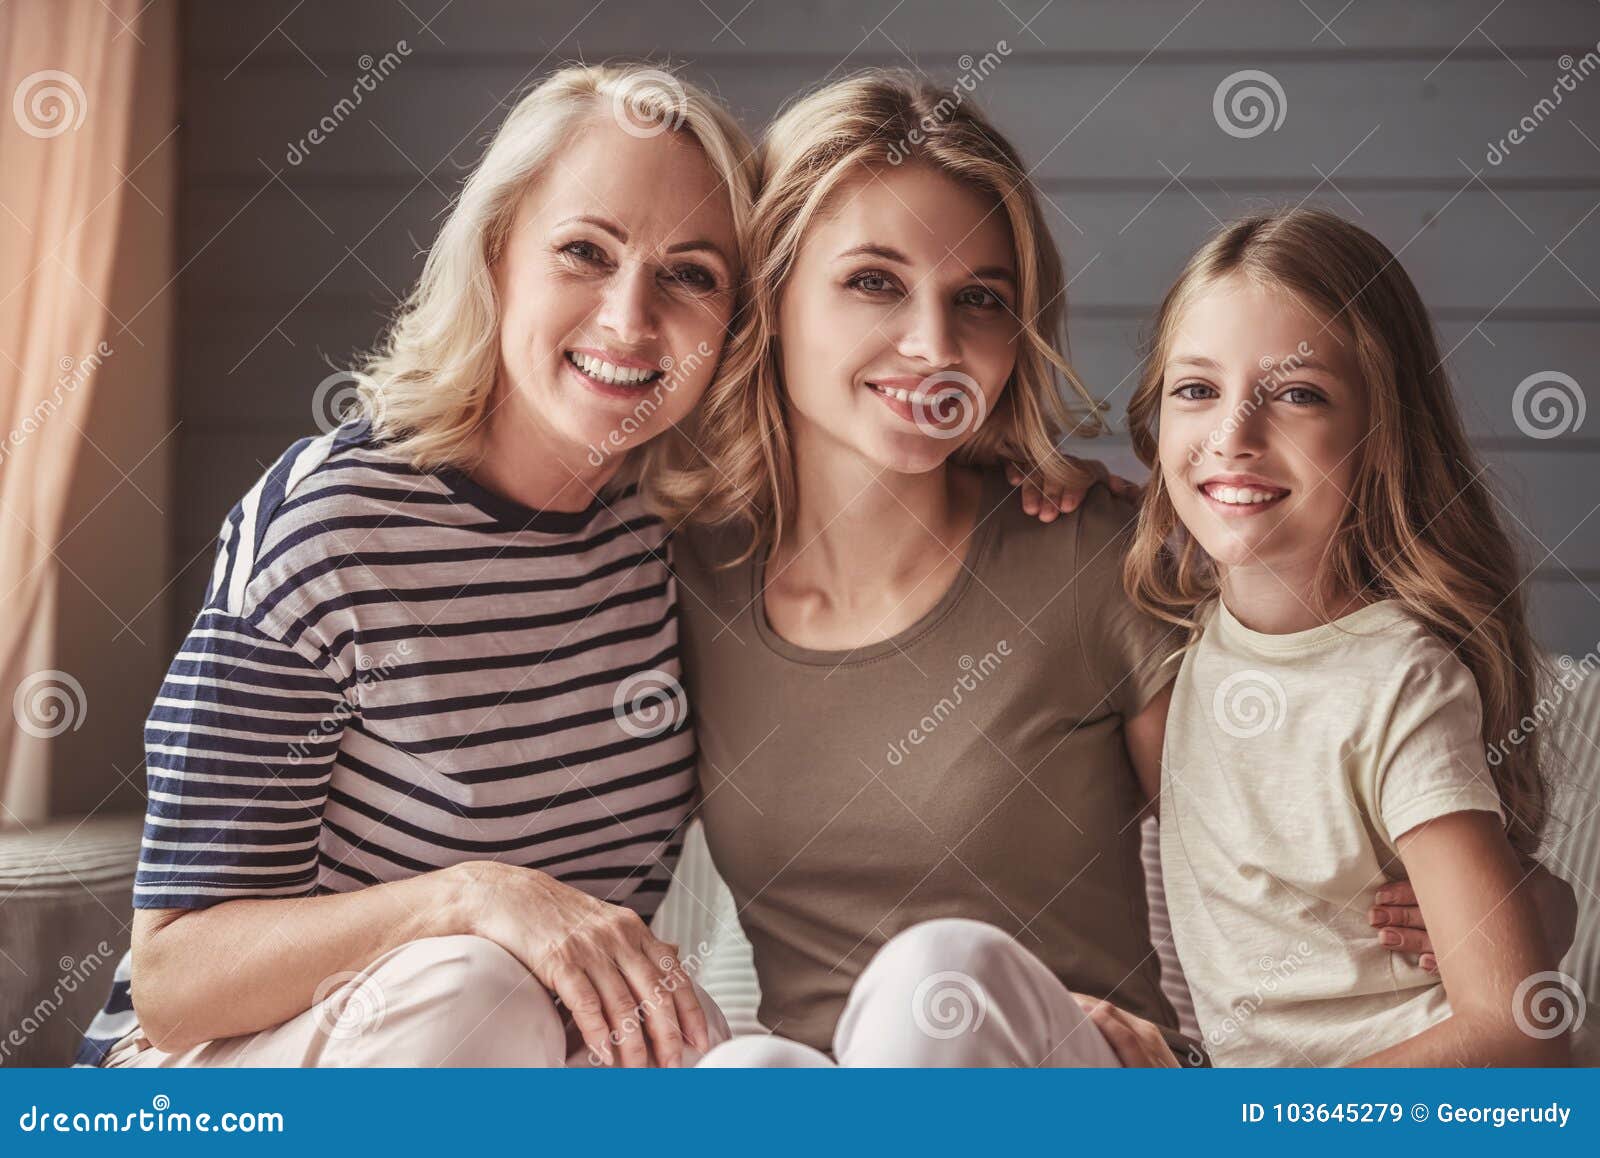 Granny Mom And Daughter Stock Image Image Of Mature 1036452